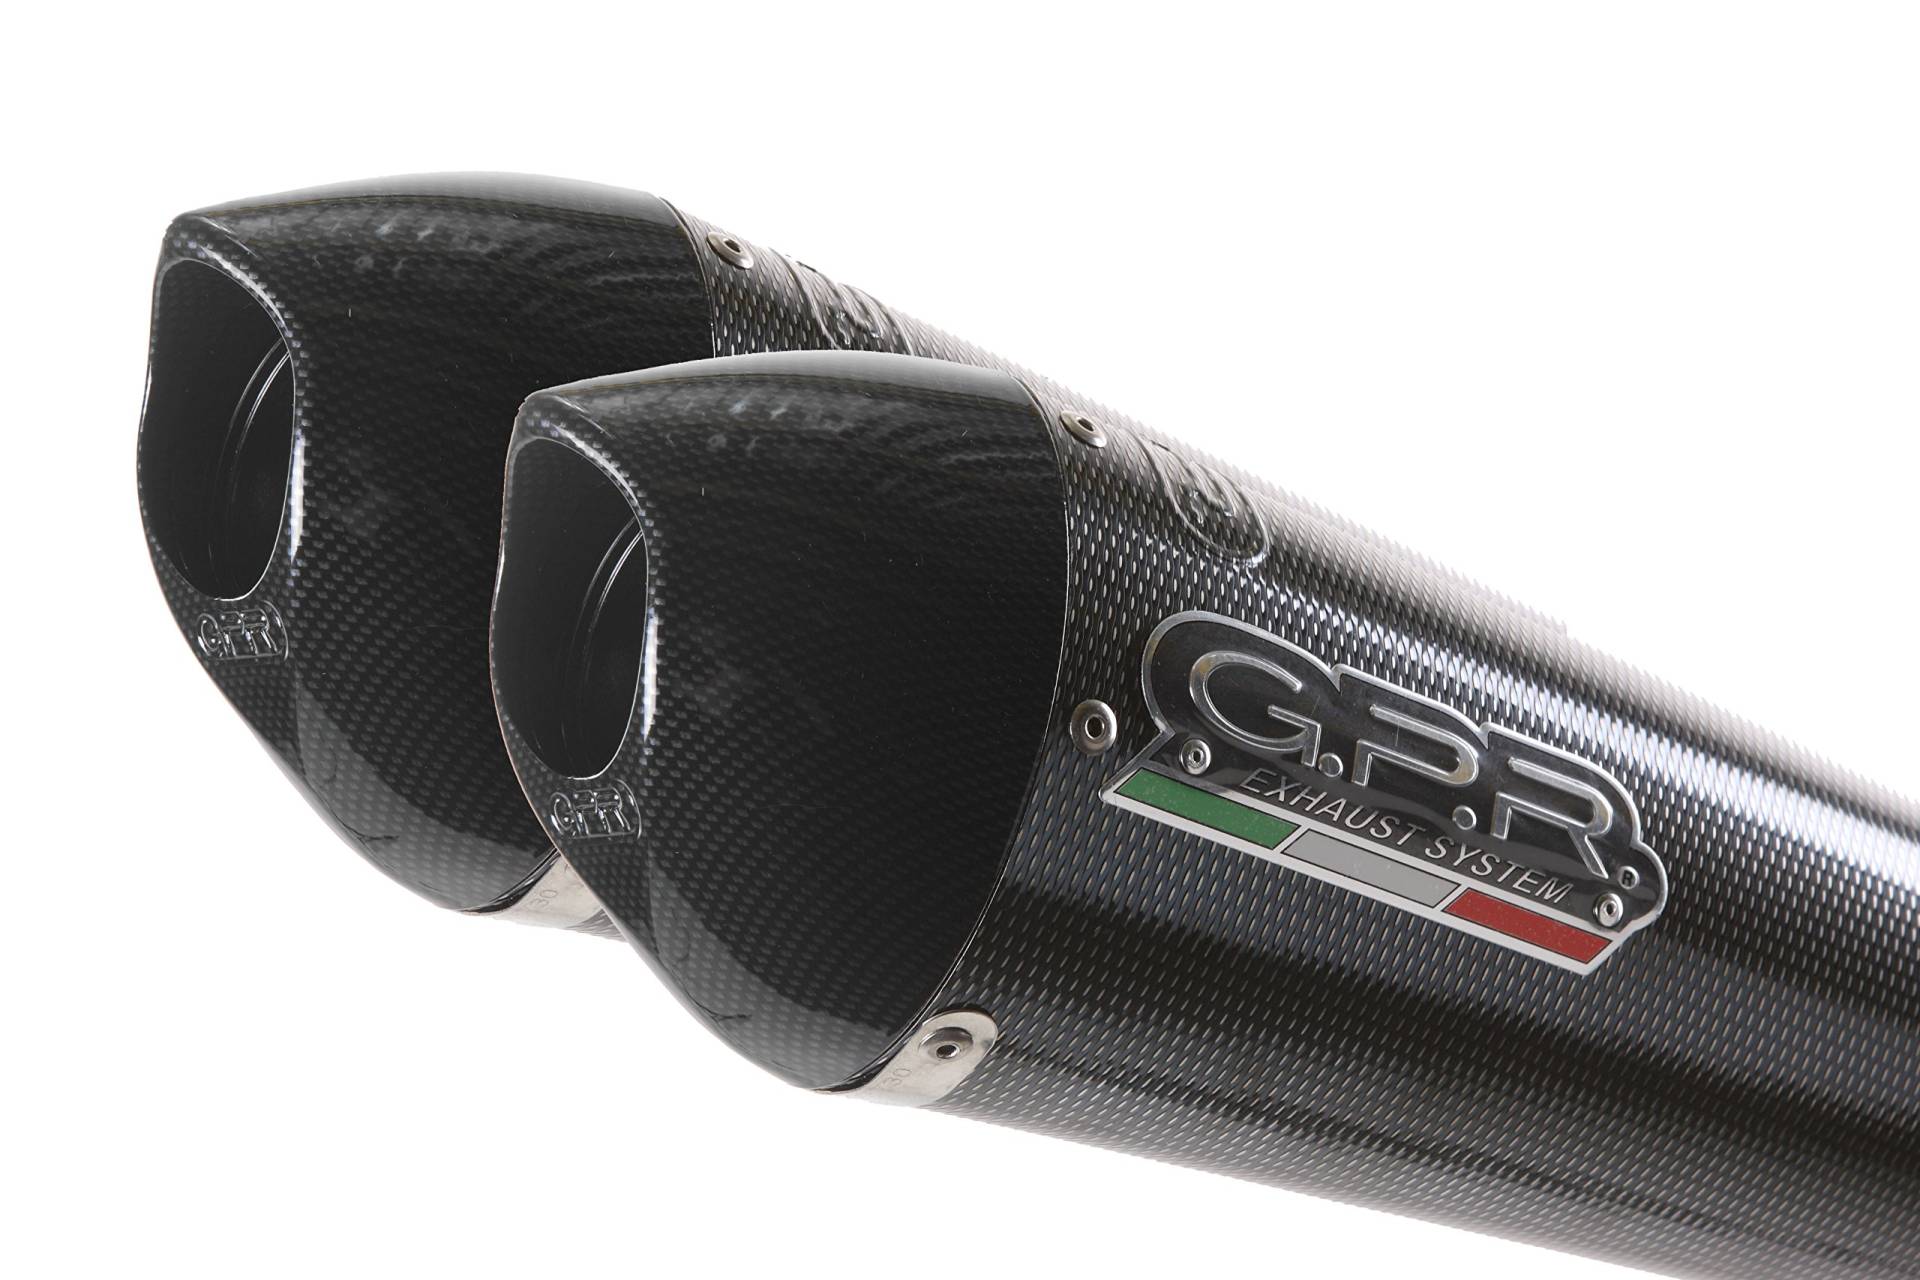 GPR Auspuff Endkappe – Ducati Monster 800 2003/05 Dual HOMOLOGATED Slip Exhaust System High Level by GPR Exhaust Systems der EVO Poppy Line von GPR EXHAUST SYSTEM